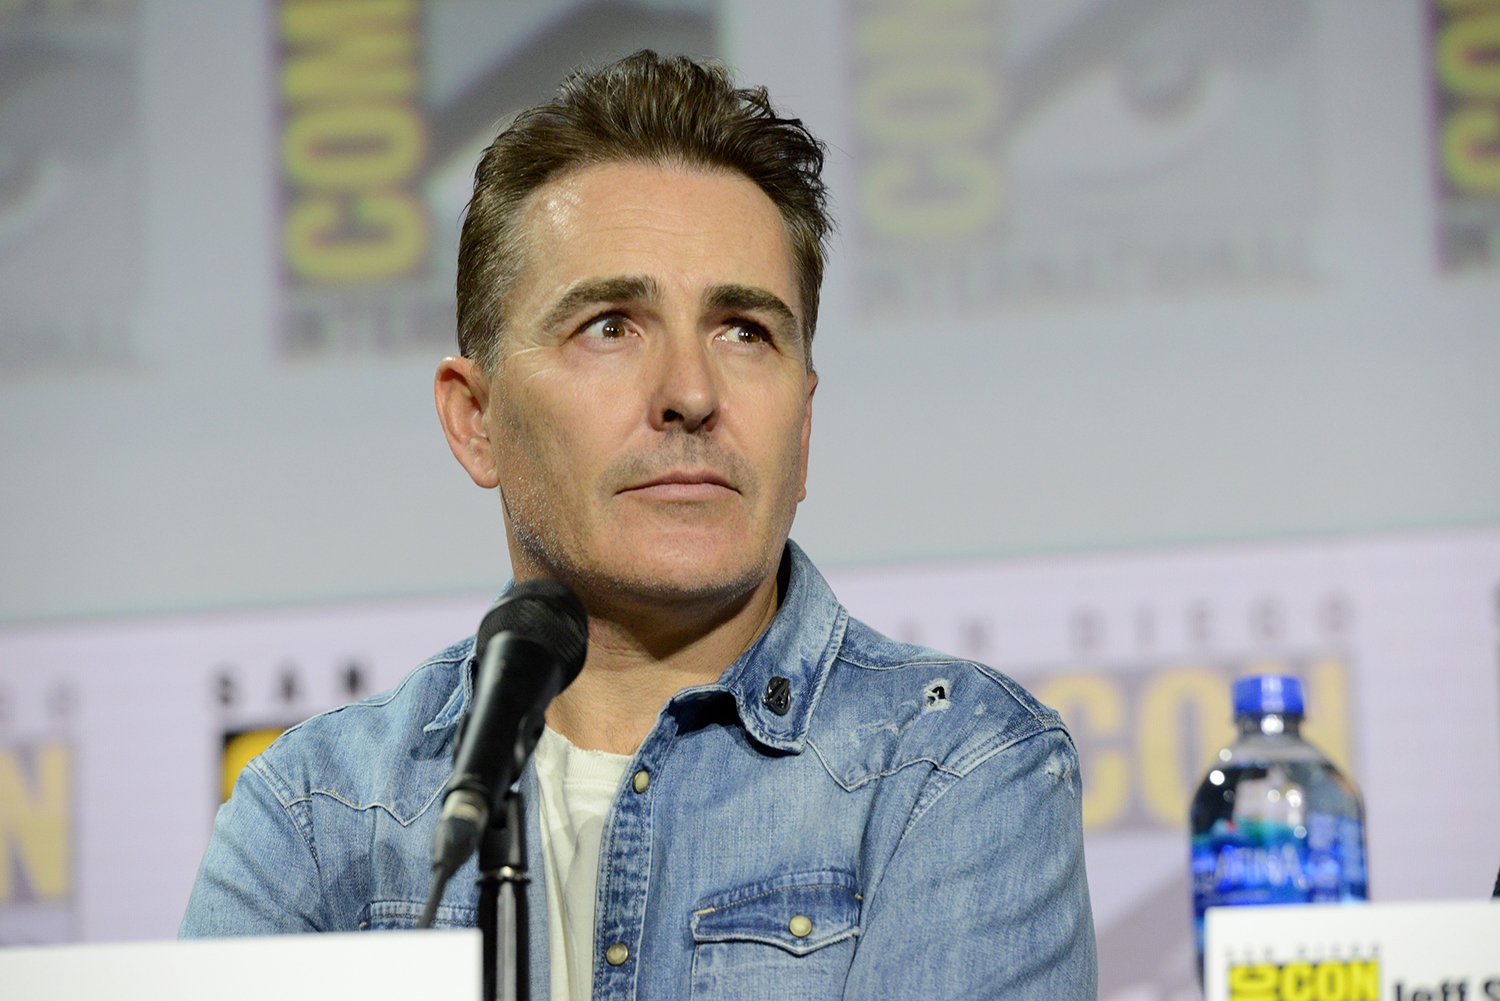 Uncharted voice actor Nolan North attends Comic Con International 2019